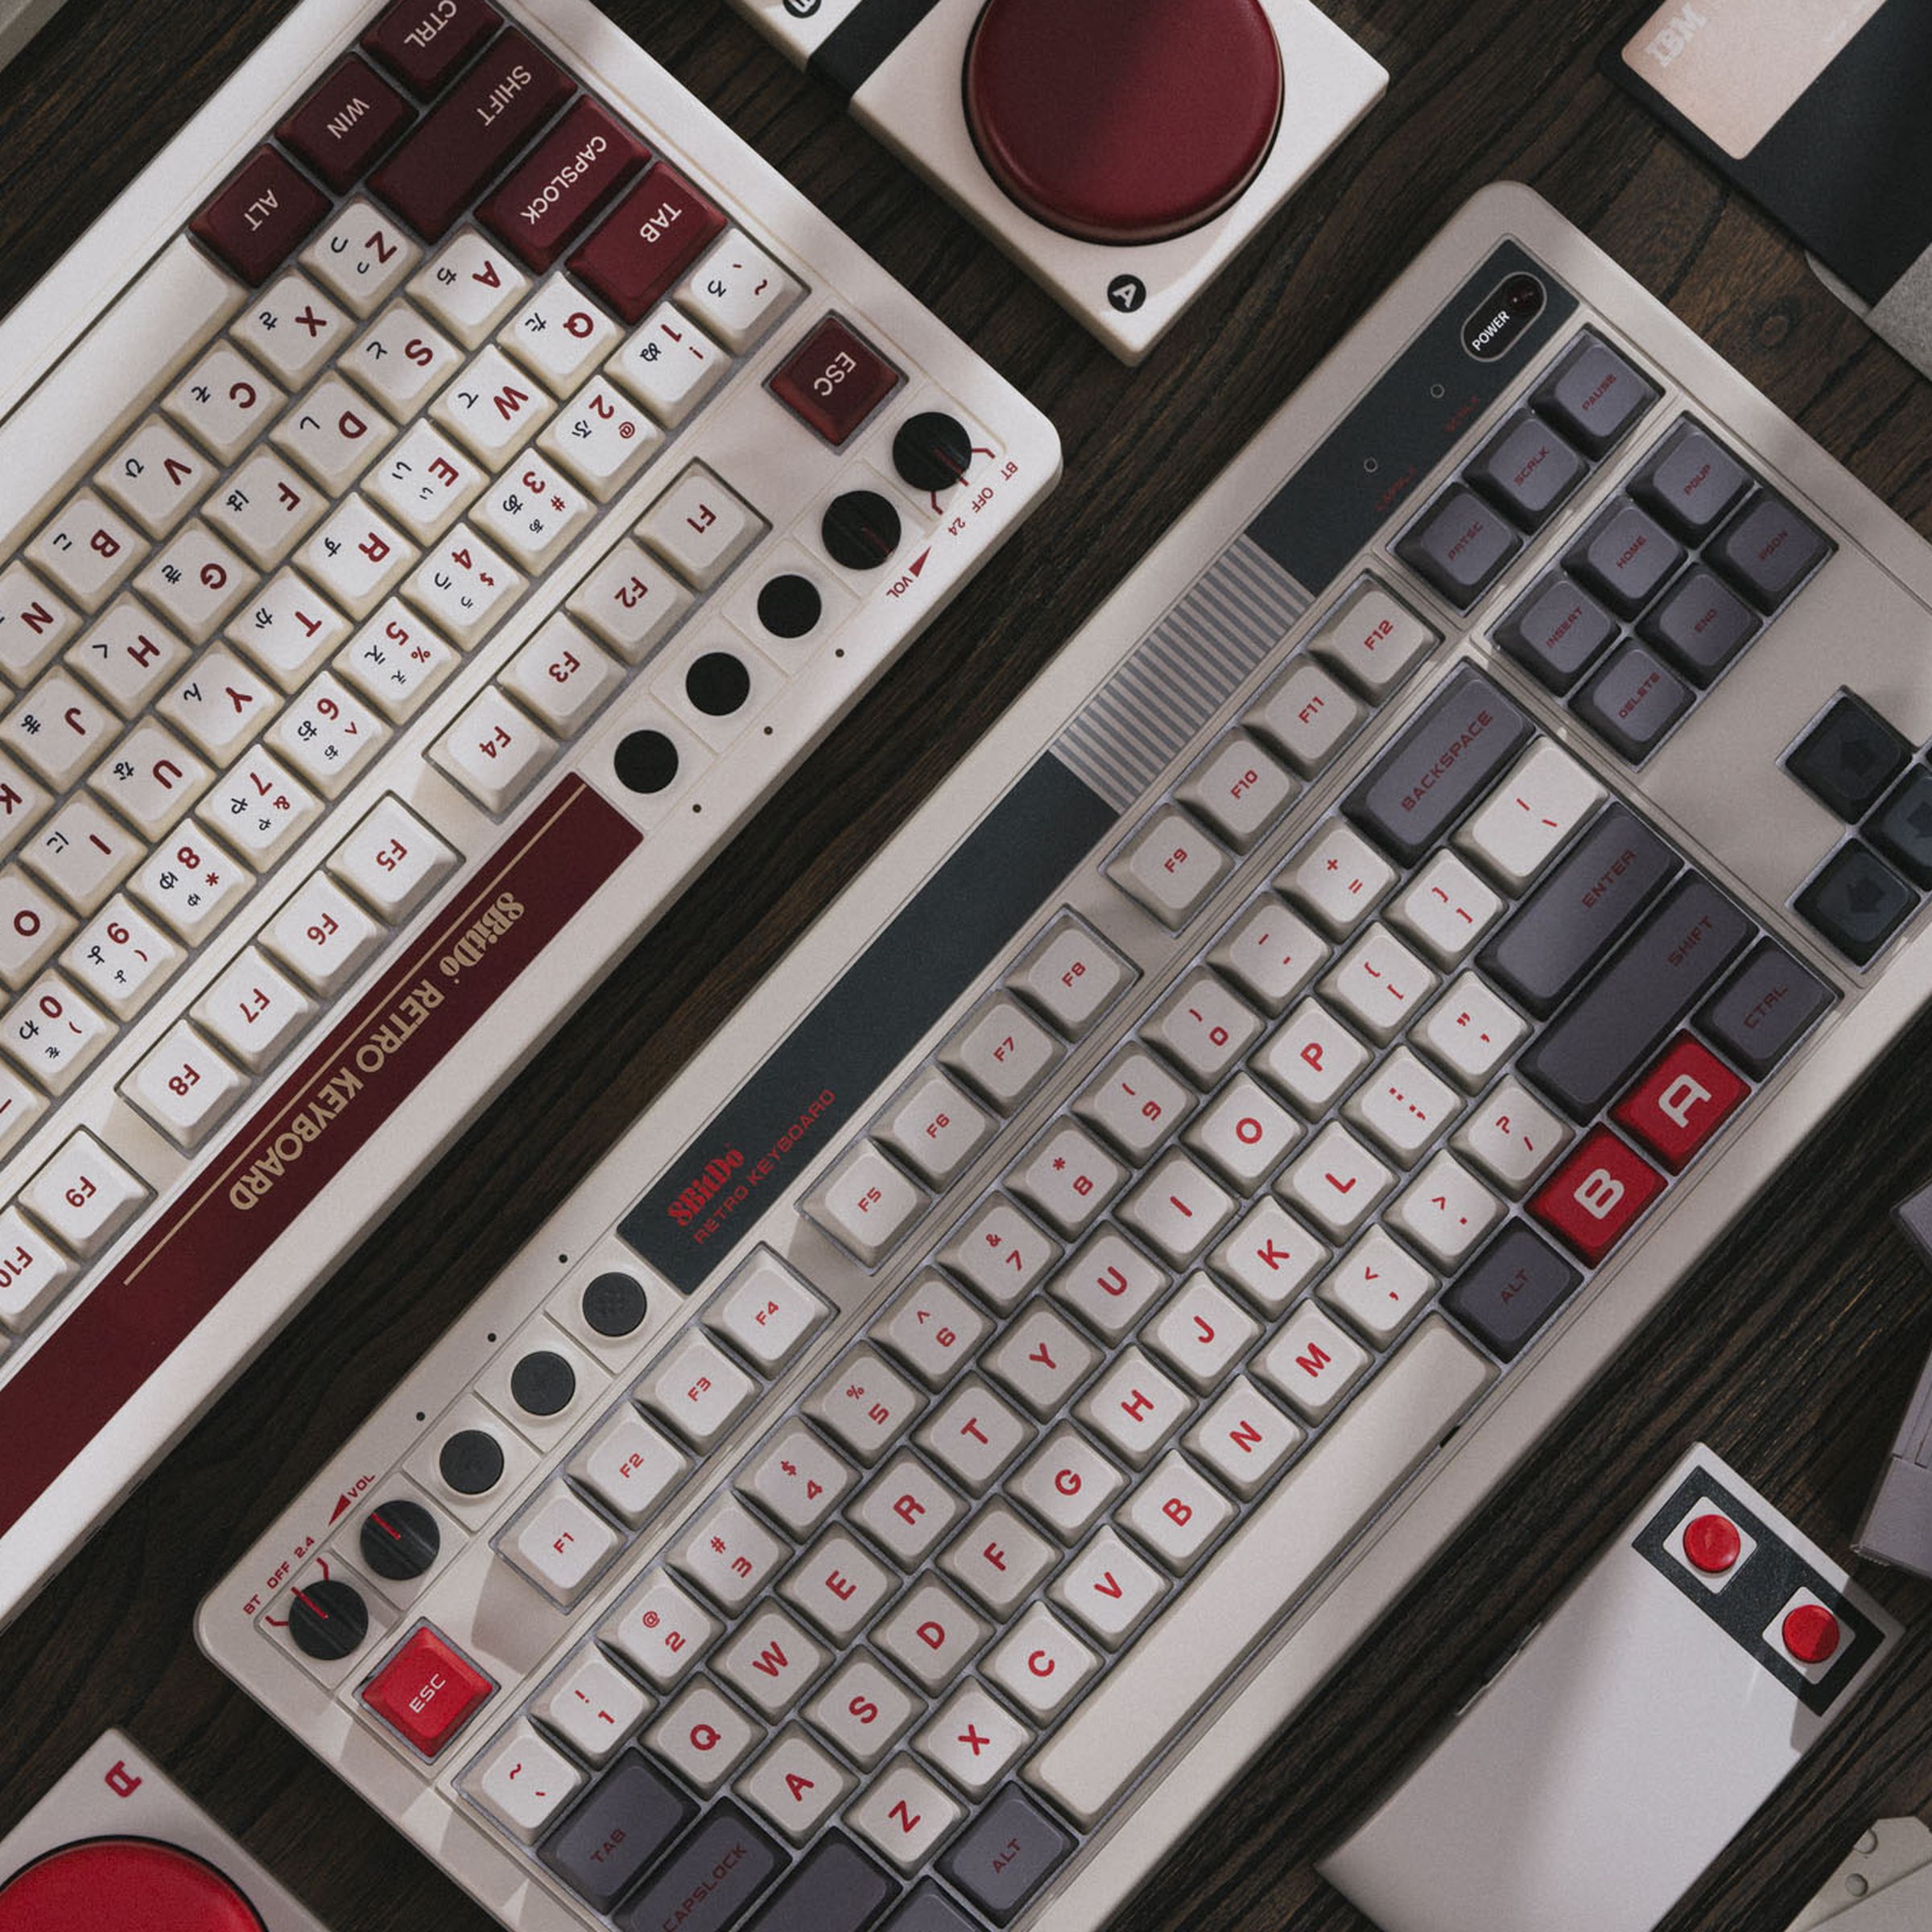 Two keyboards in a sea of retro tech and Nintendo paraphernalia.